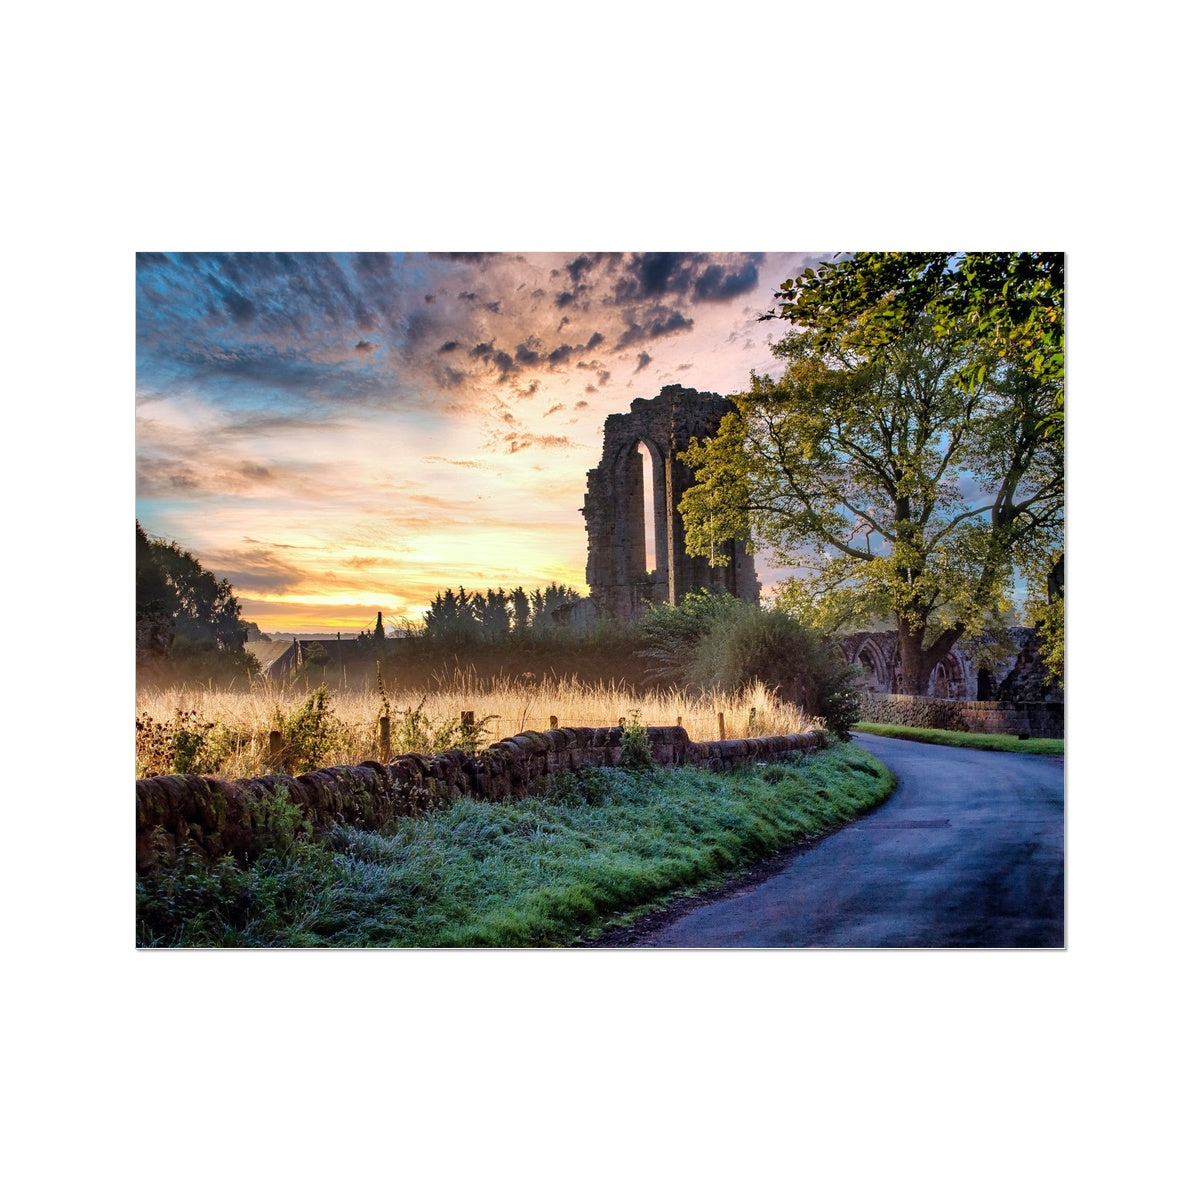 Dawn's Embrace at Croxden Abbey Wall Art Poster